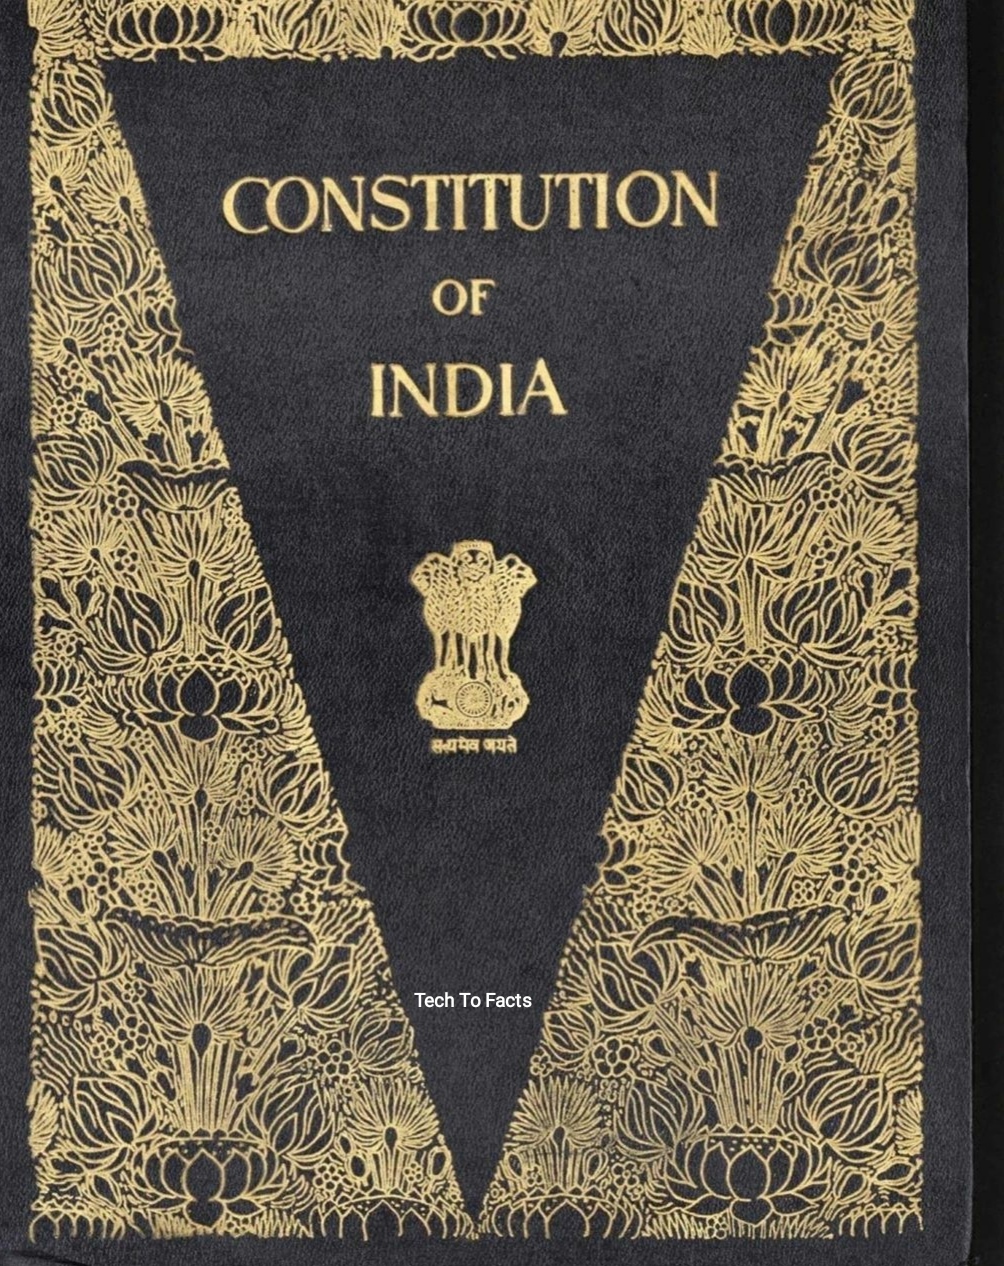 constitutional rights in india essay